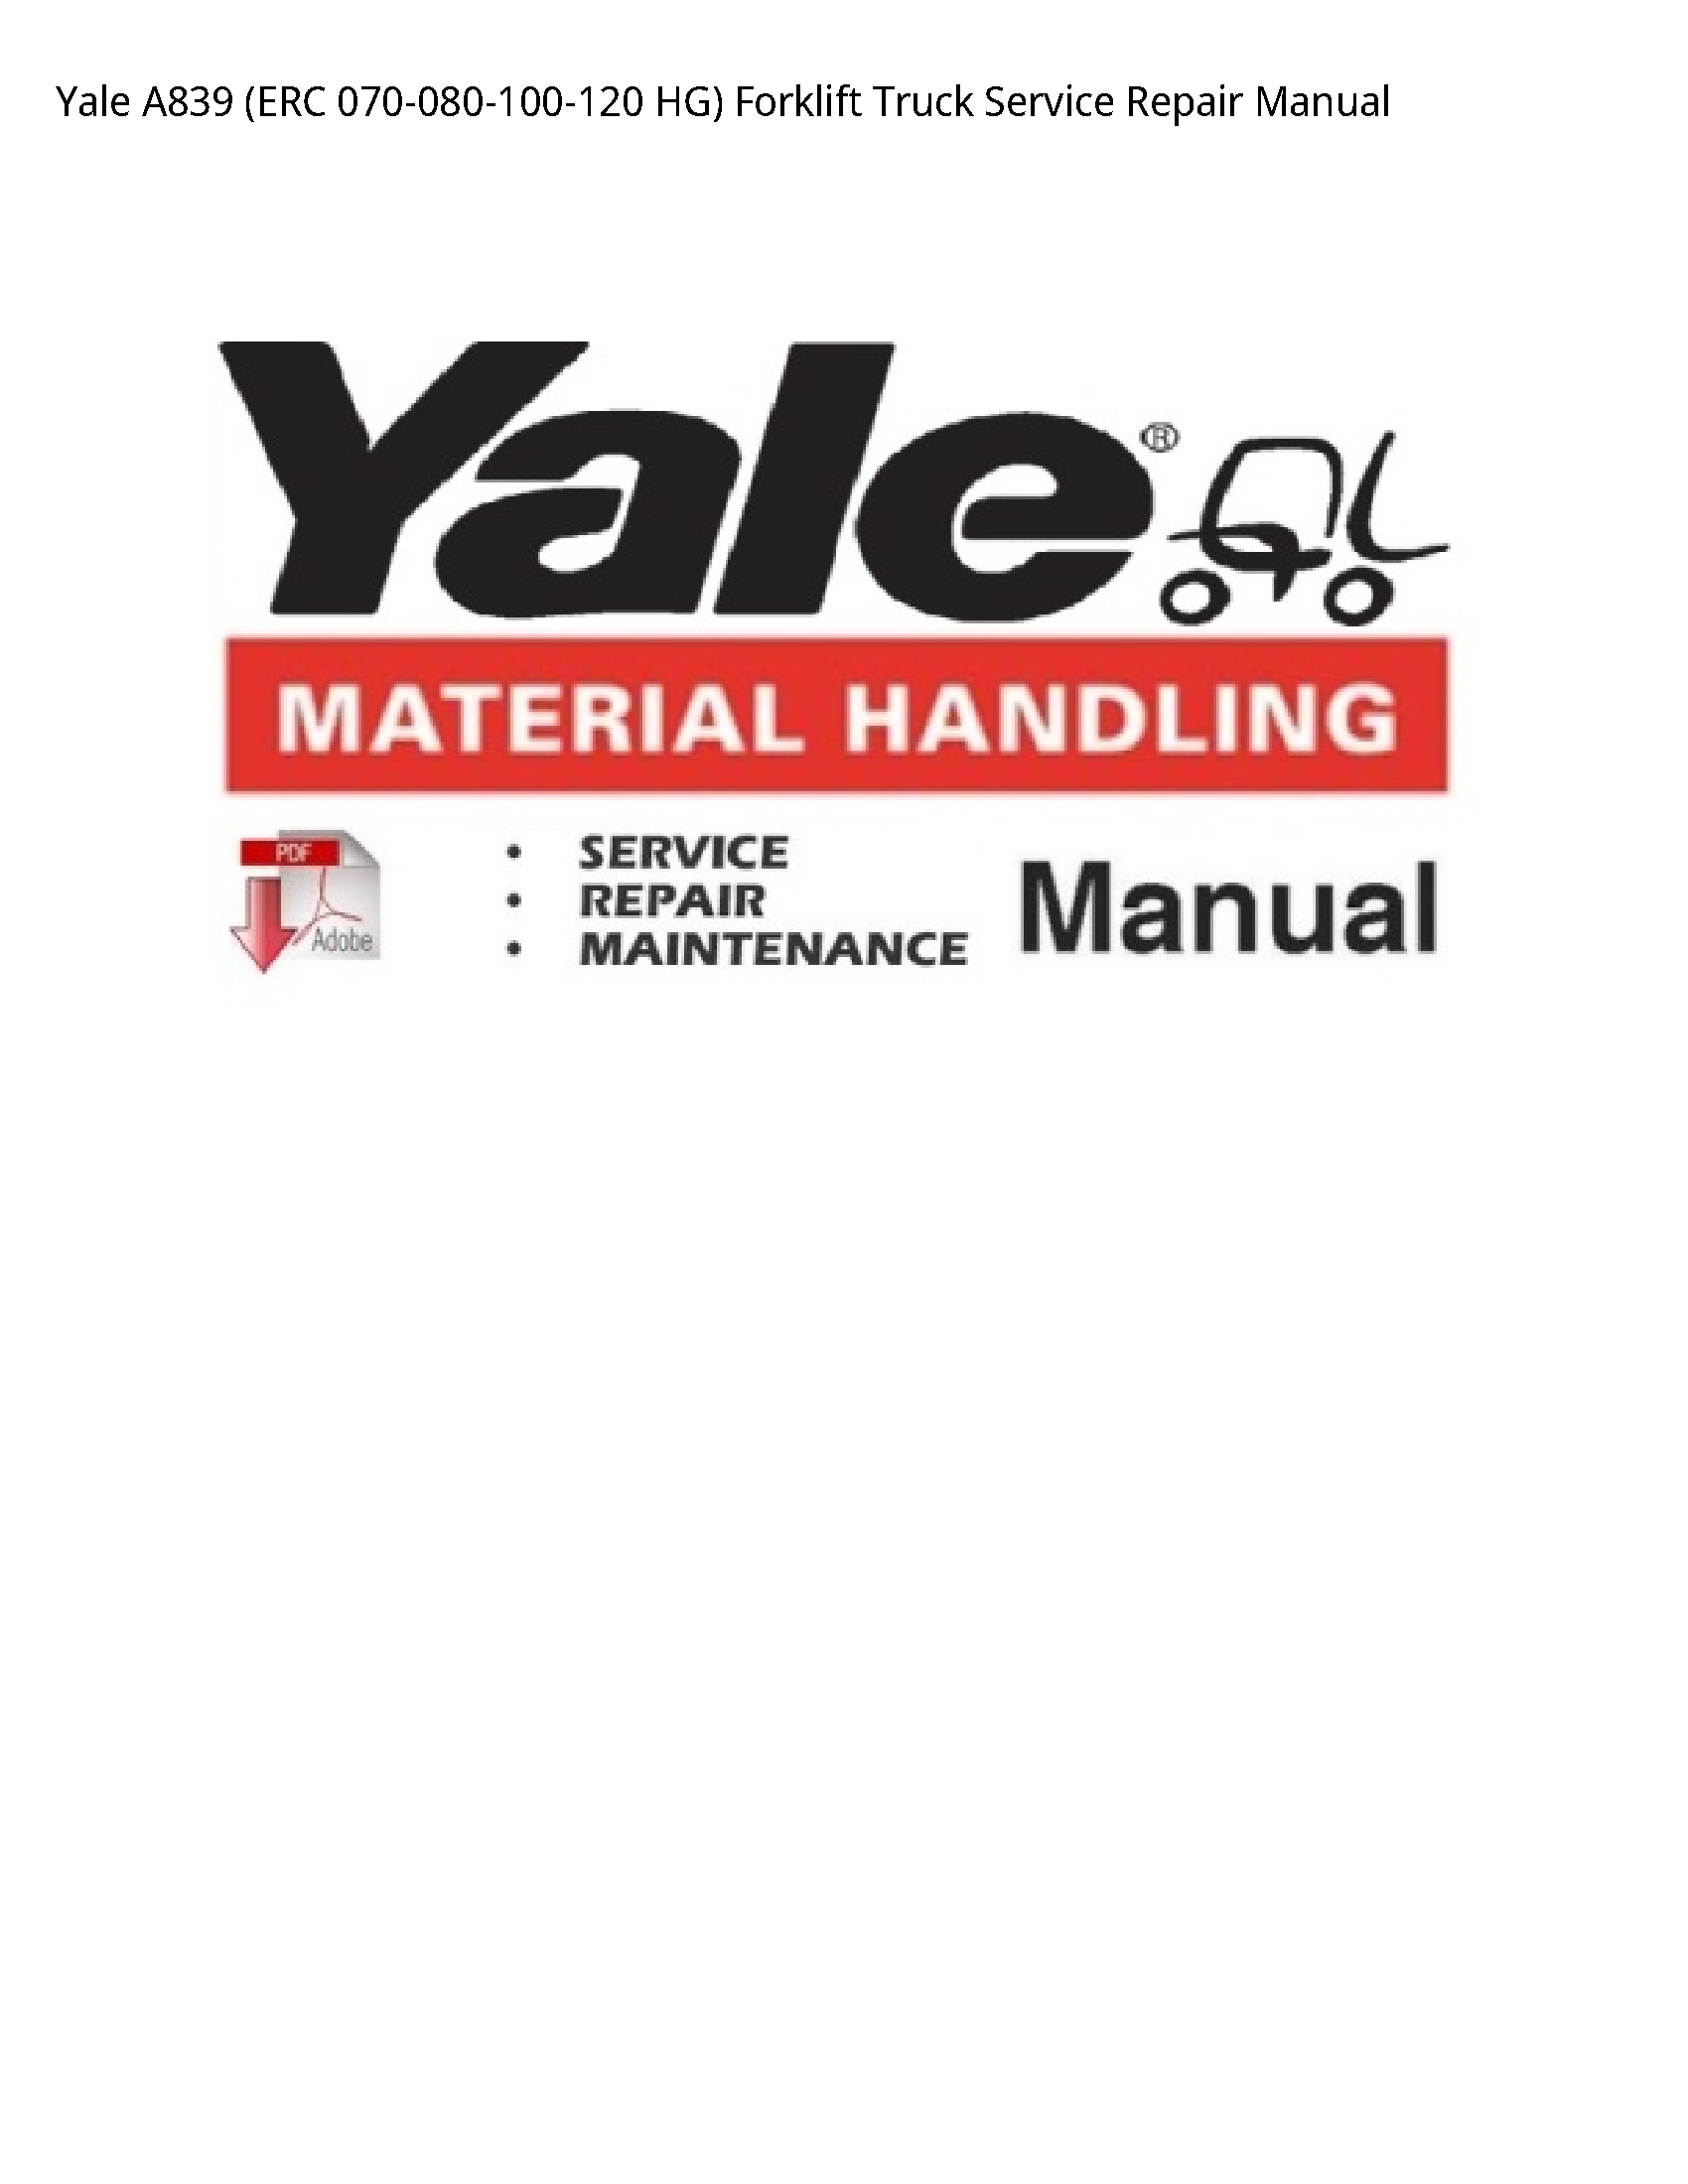 Yale A839 (ERC HG) Forklift Truck manual